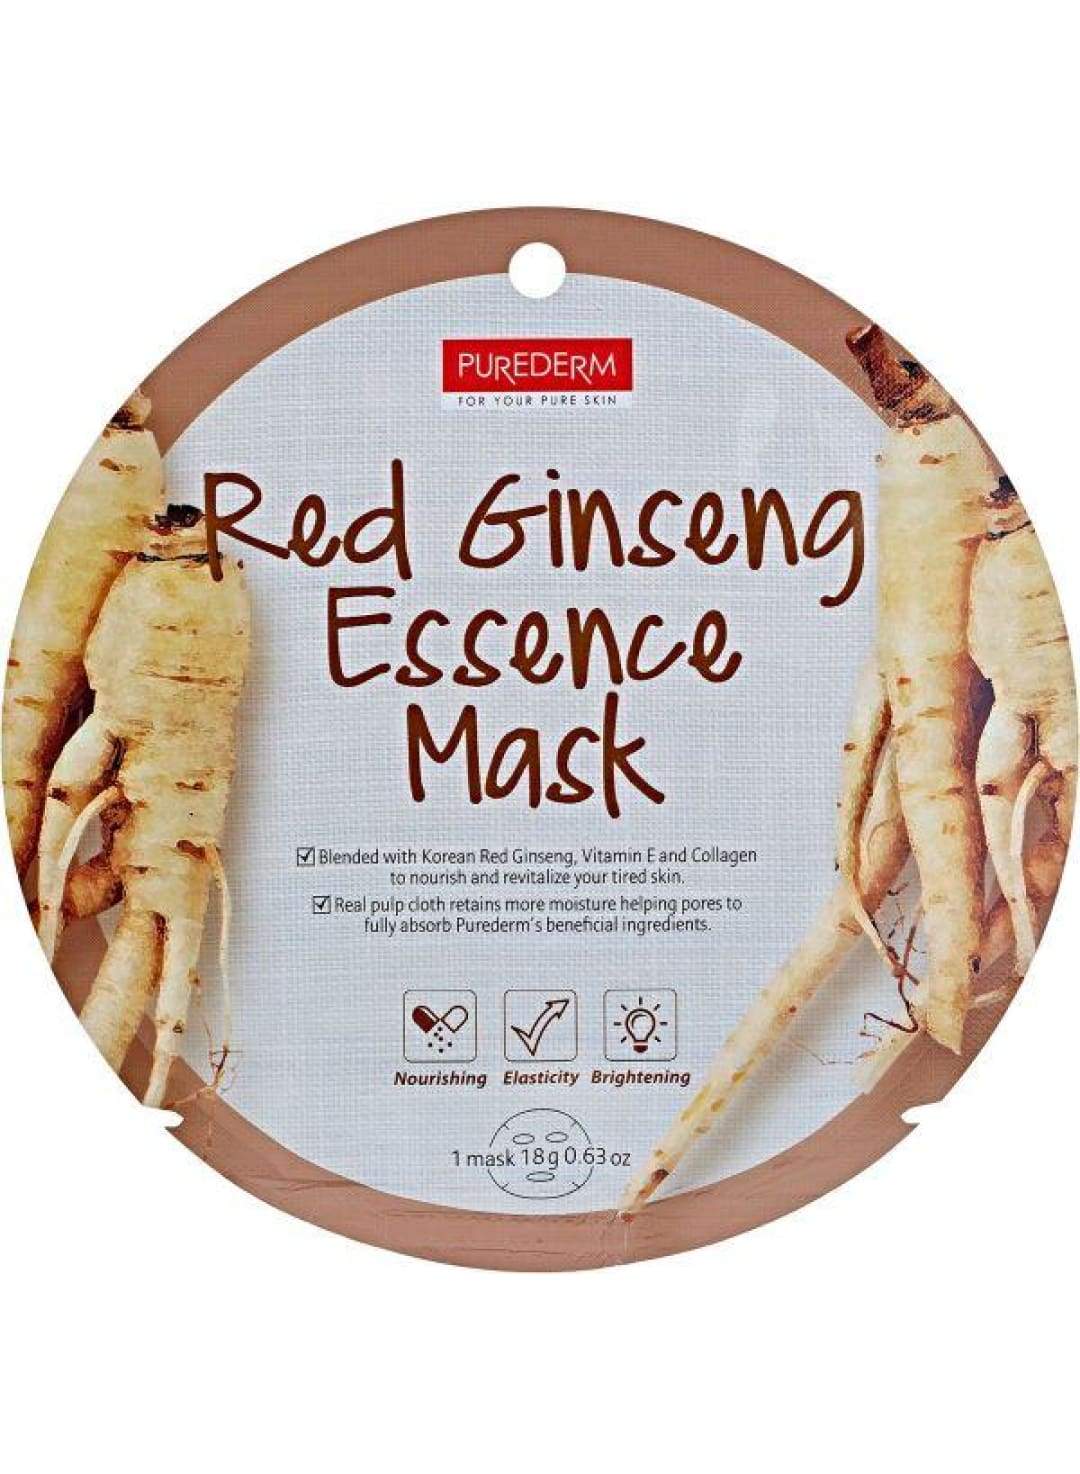 Red Ginseng Mask - Simple